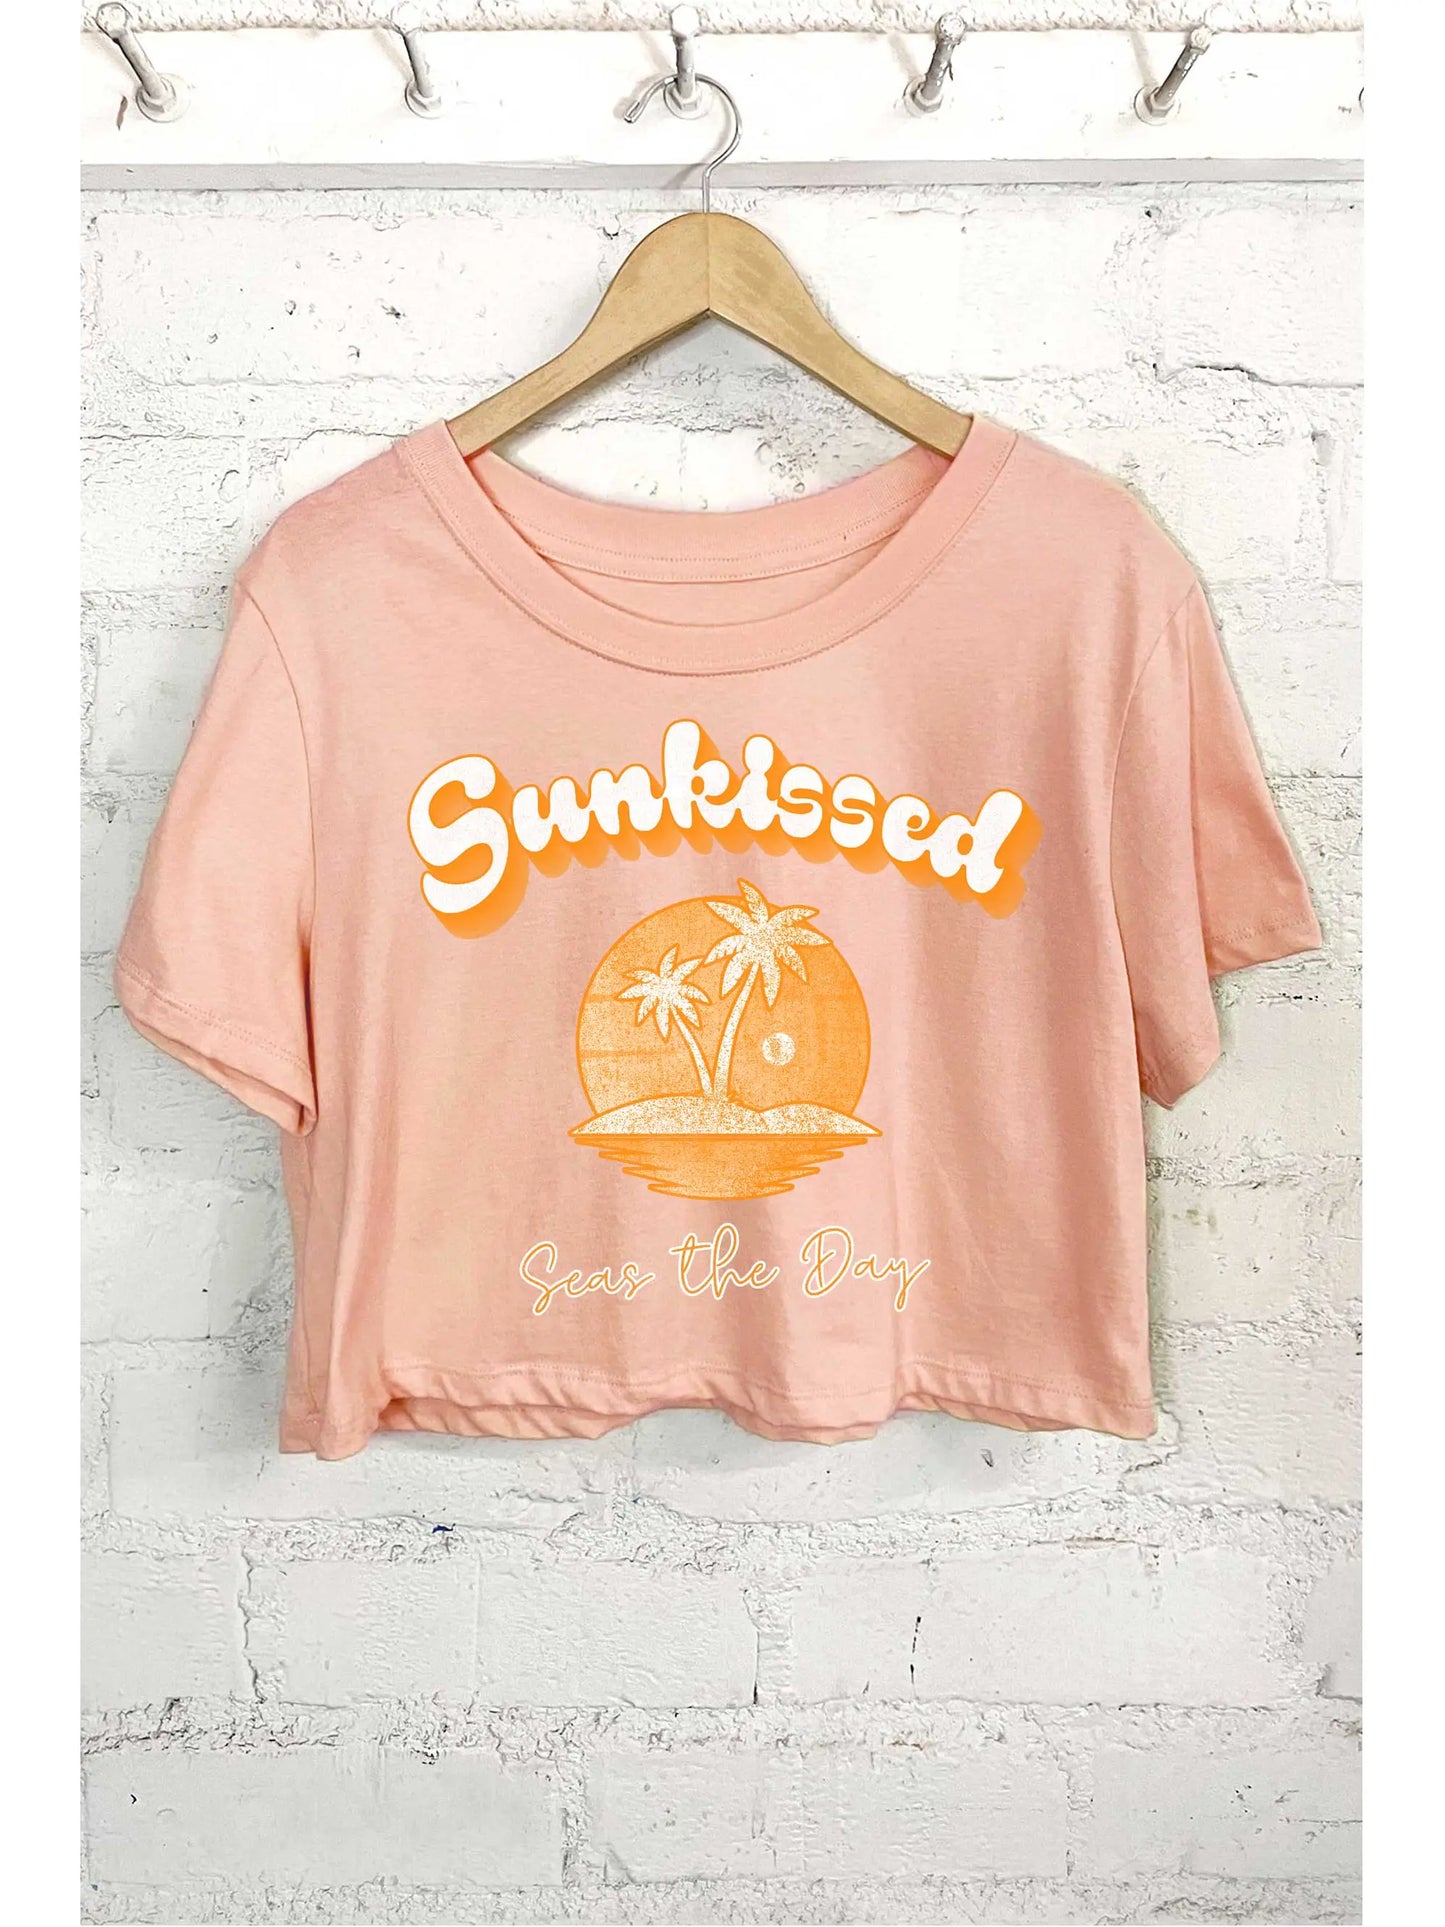 Sunkissed Seas The Day Graphic Crop Top